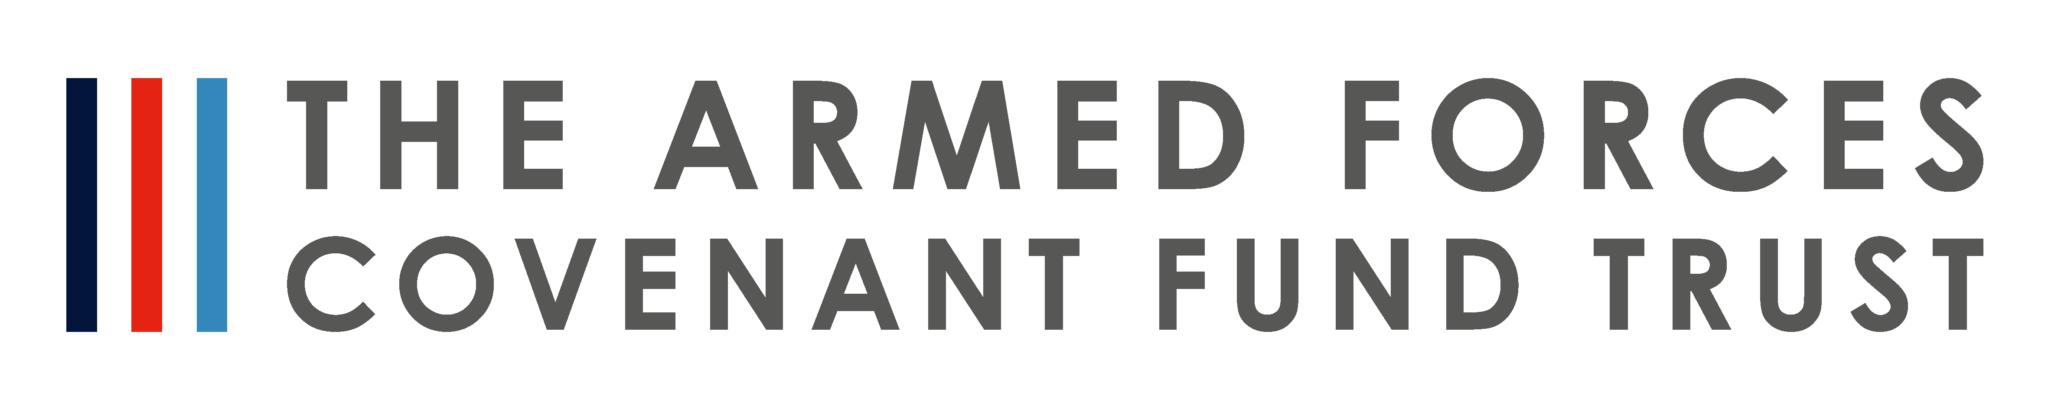 The Armed Forces Covenant Fund Trust